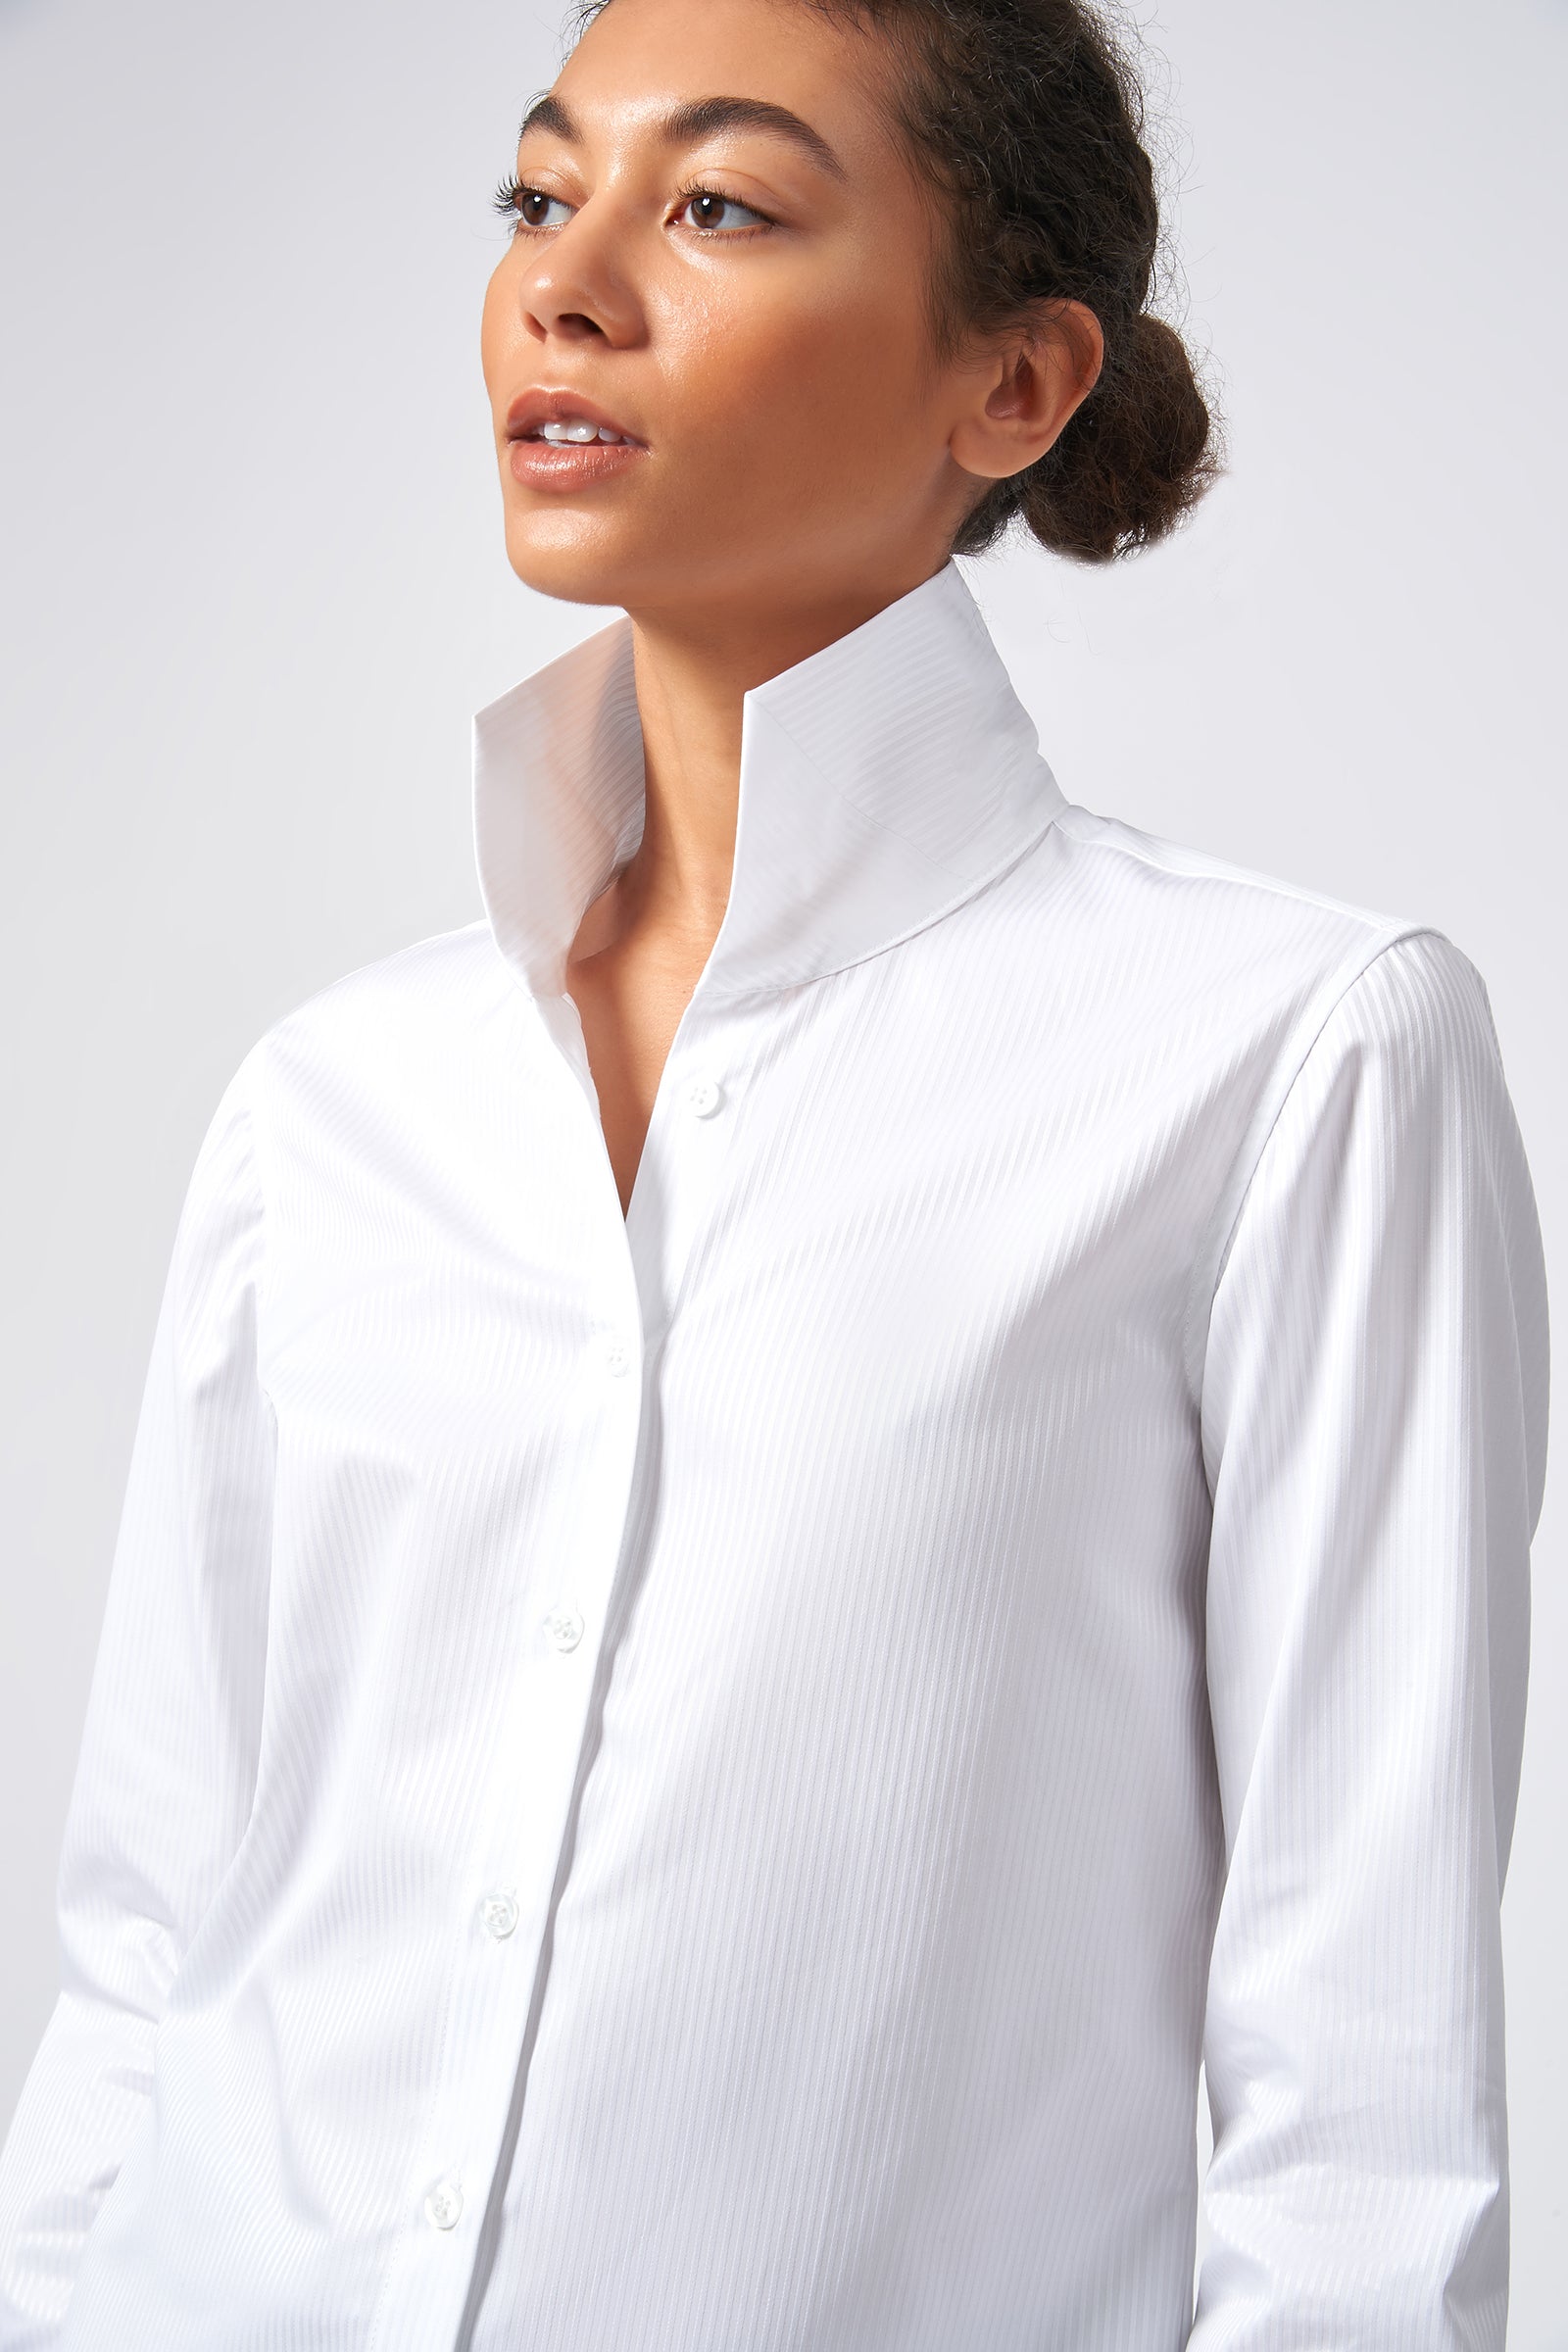 Shop All Womens Tailored Shirts – Page 2 – KAL RIEMAN